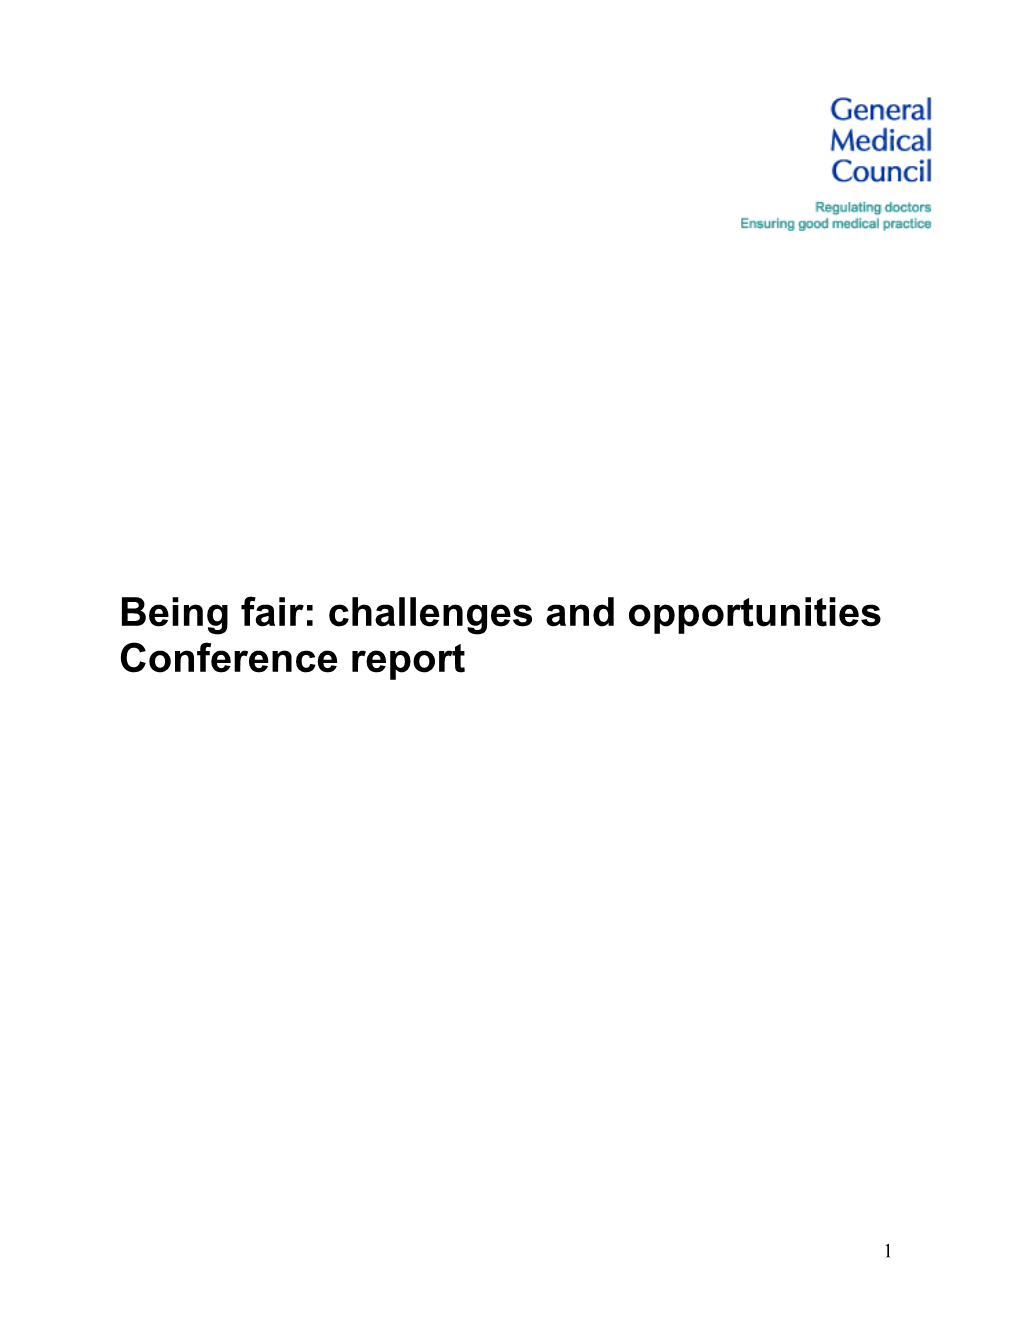 Being Fair: Challenges and Opportunities